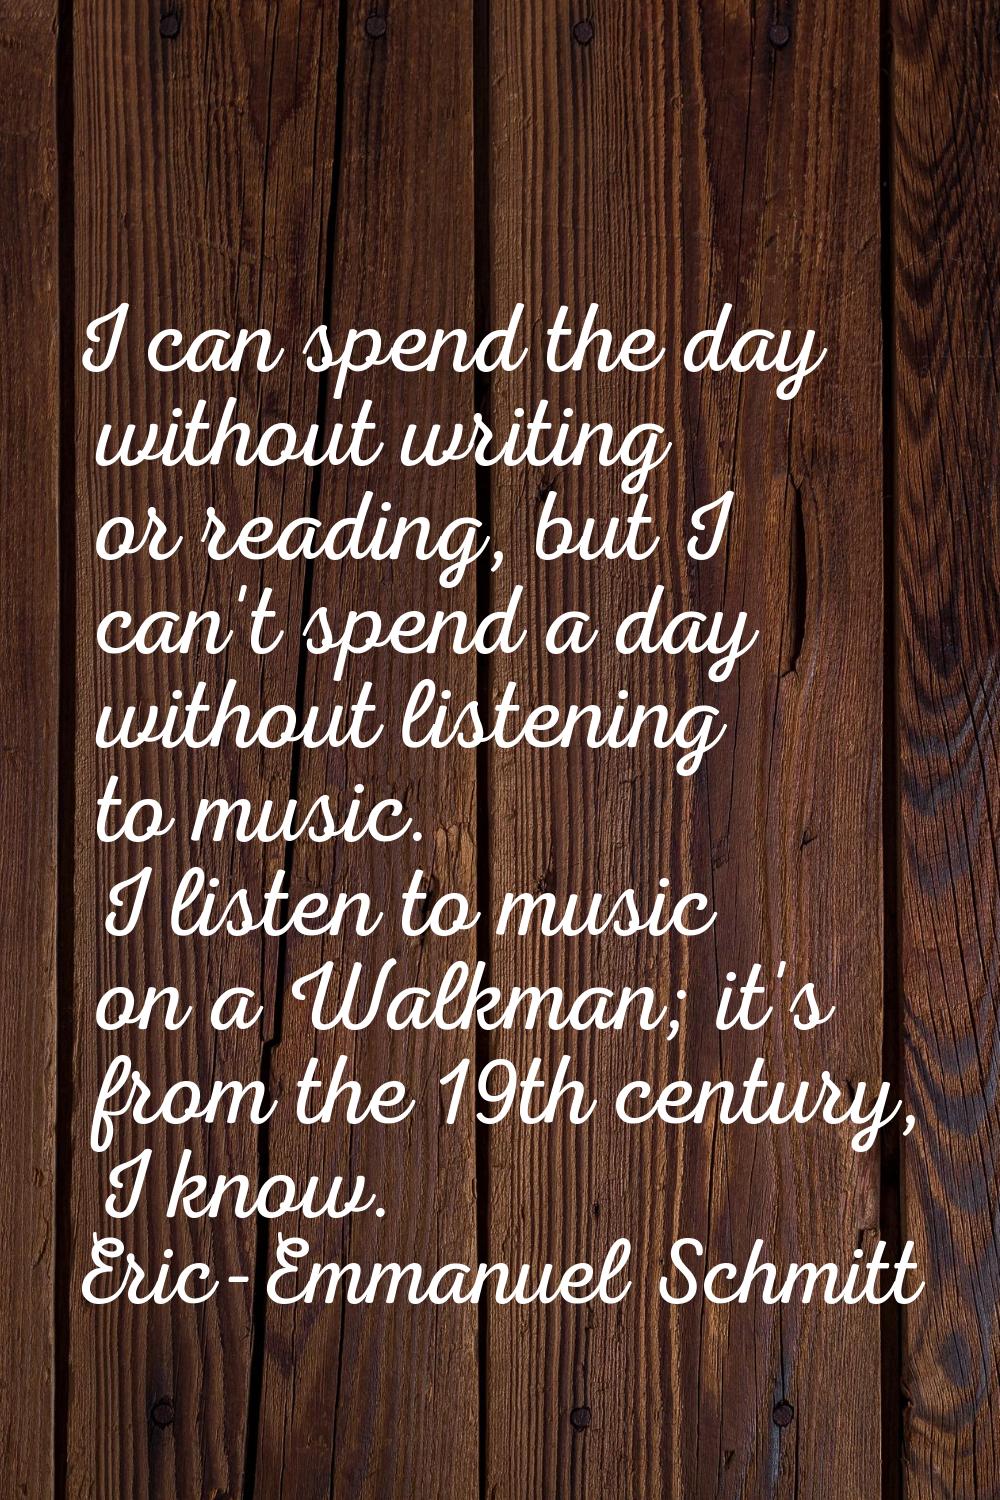 I can spend the day without writing or reading, but I can't spend a day without listening to music.